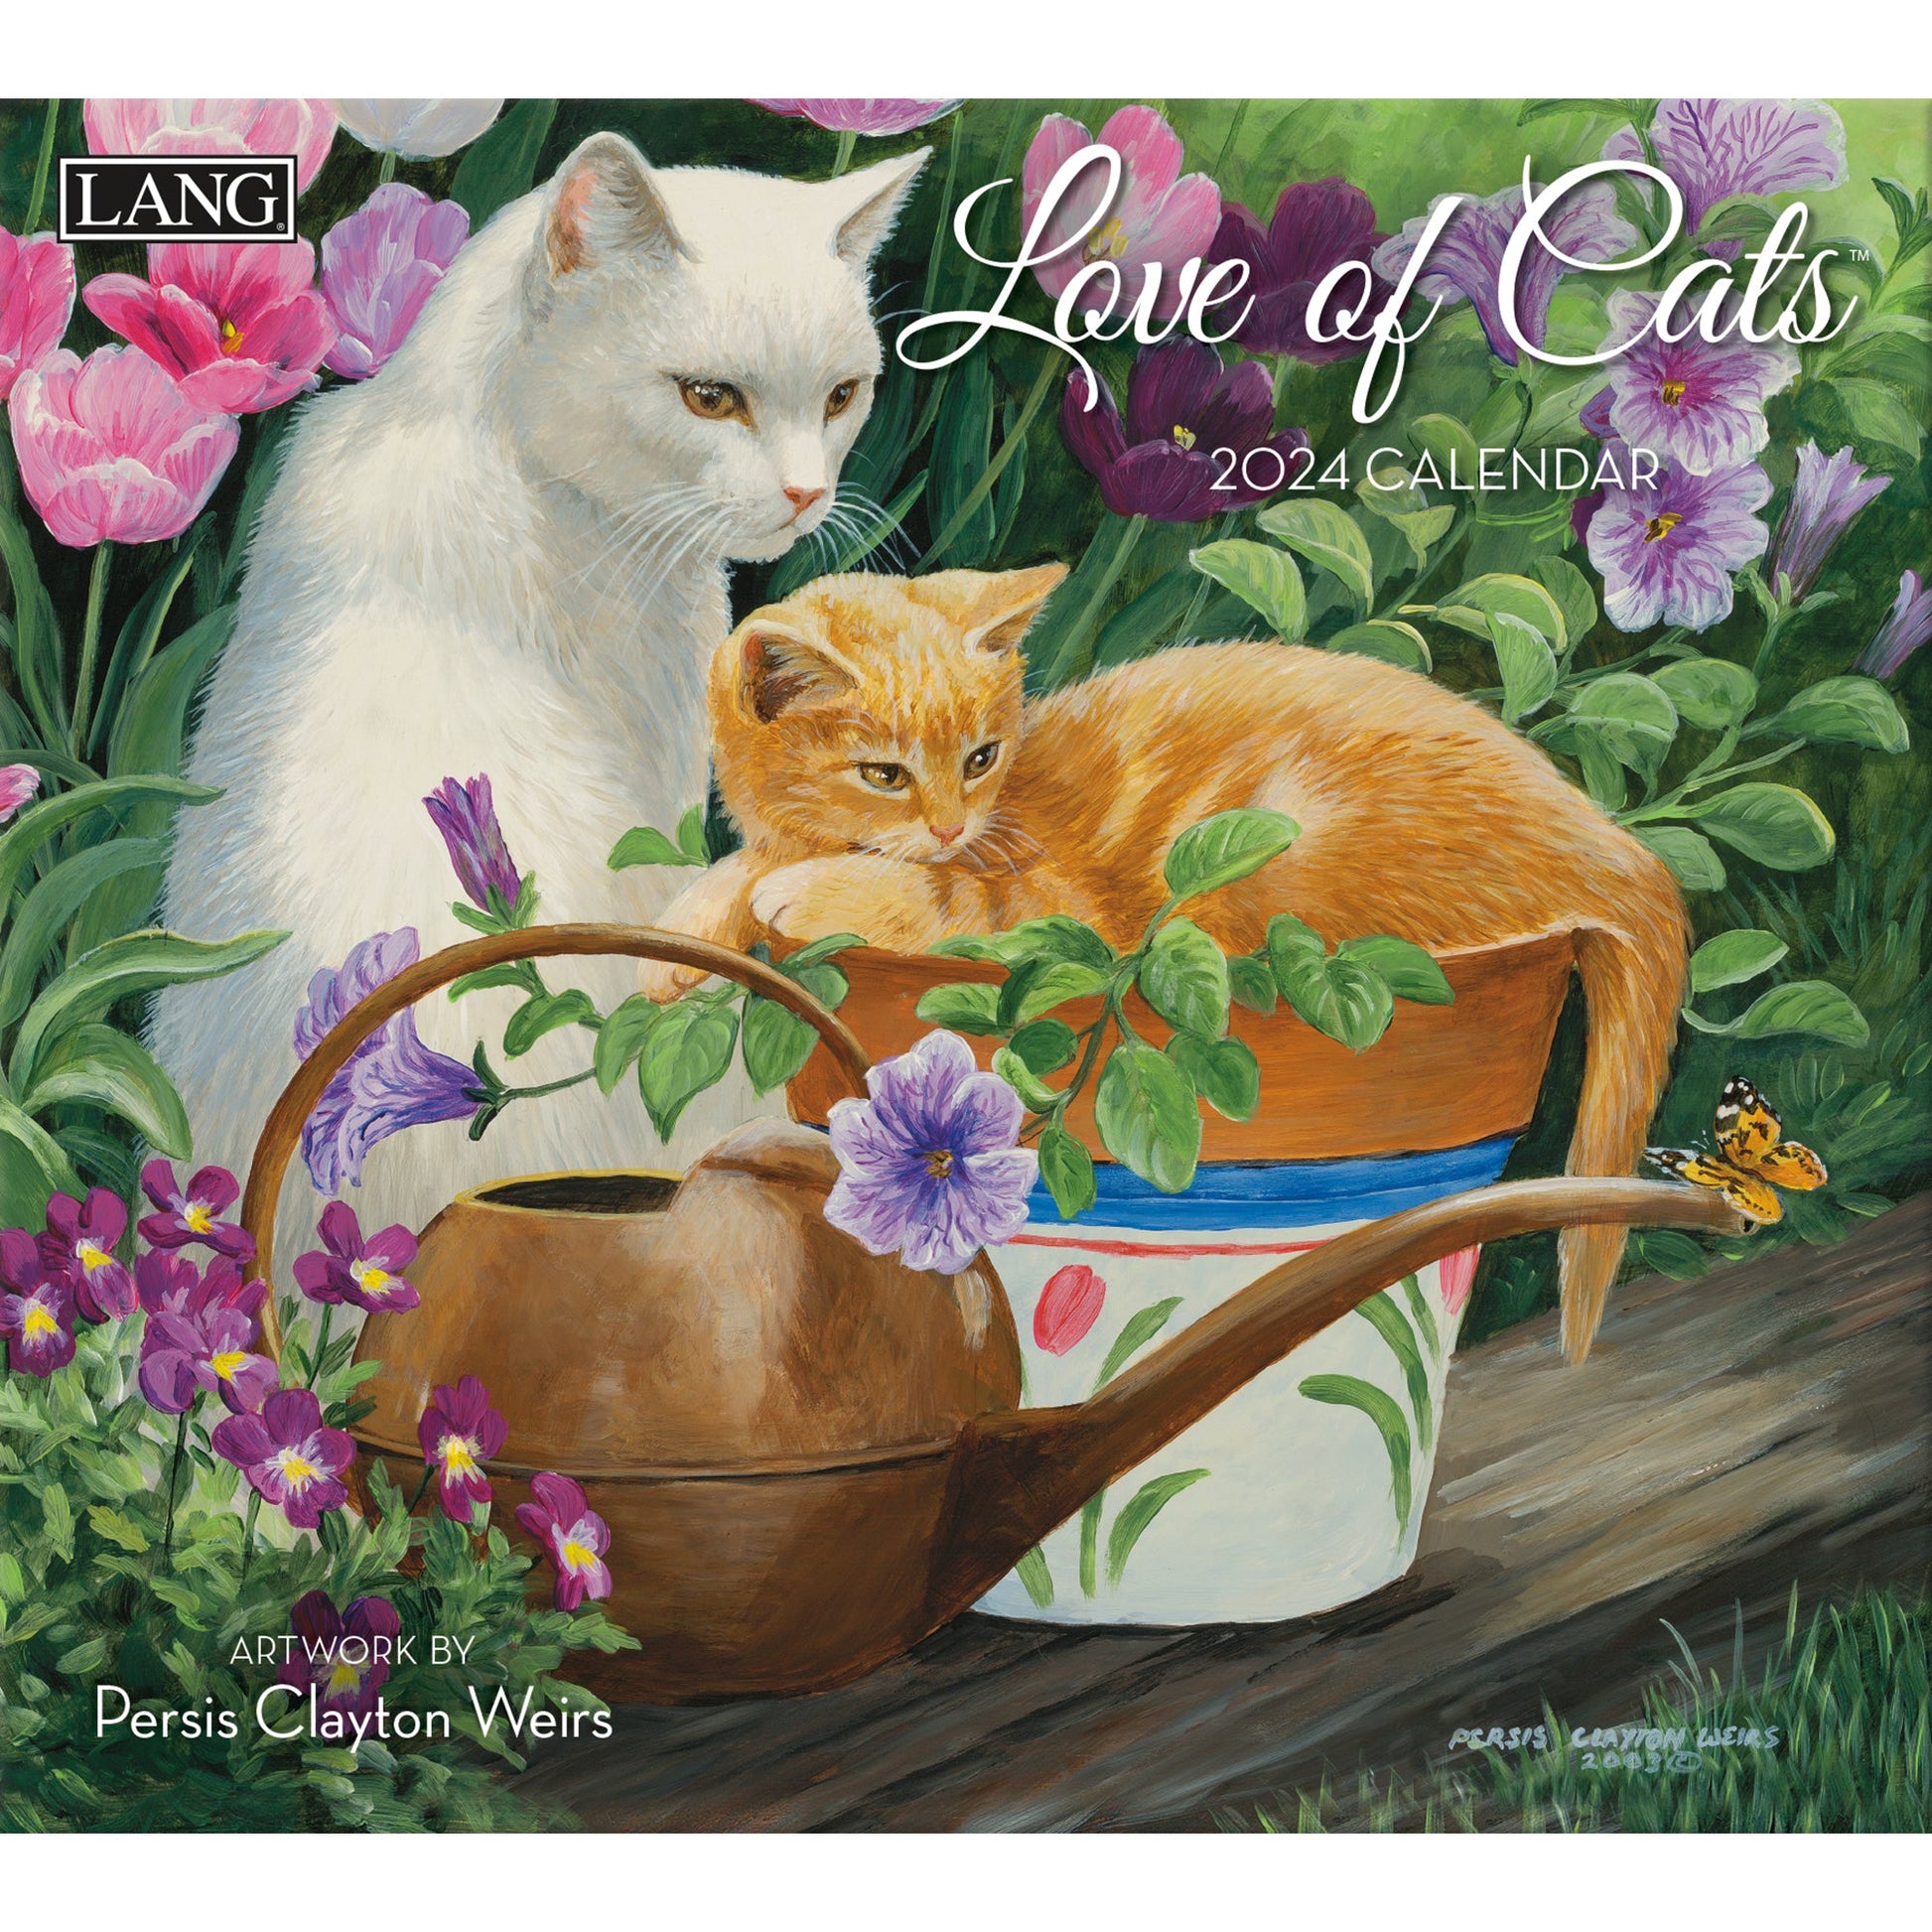 2024 Cats in the Country - Calendar – Wild Wings